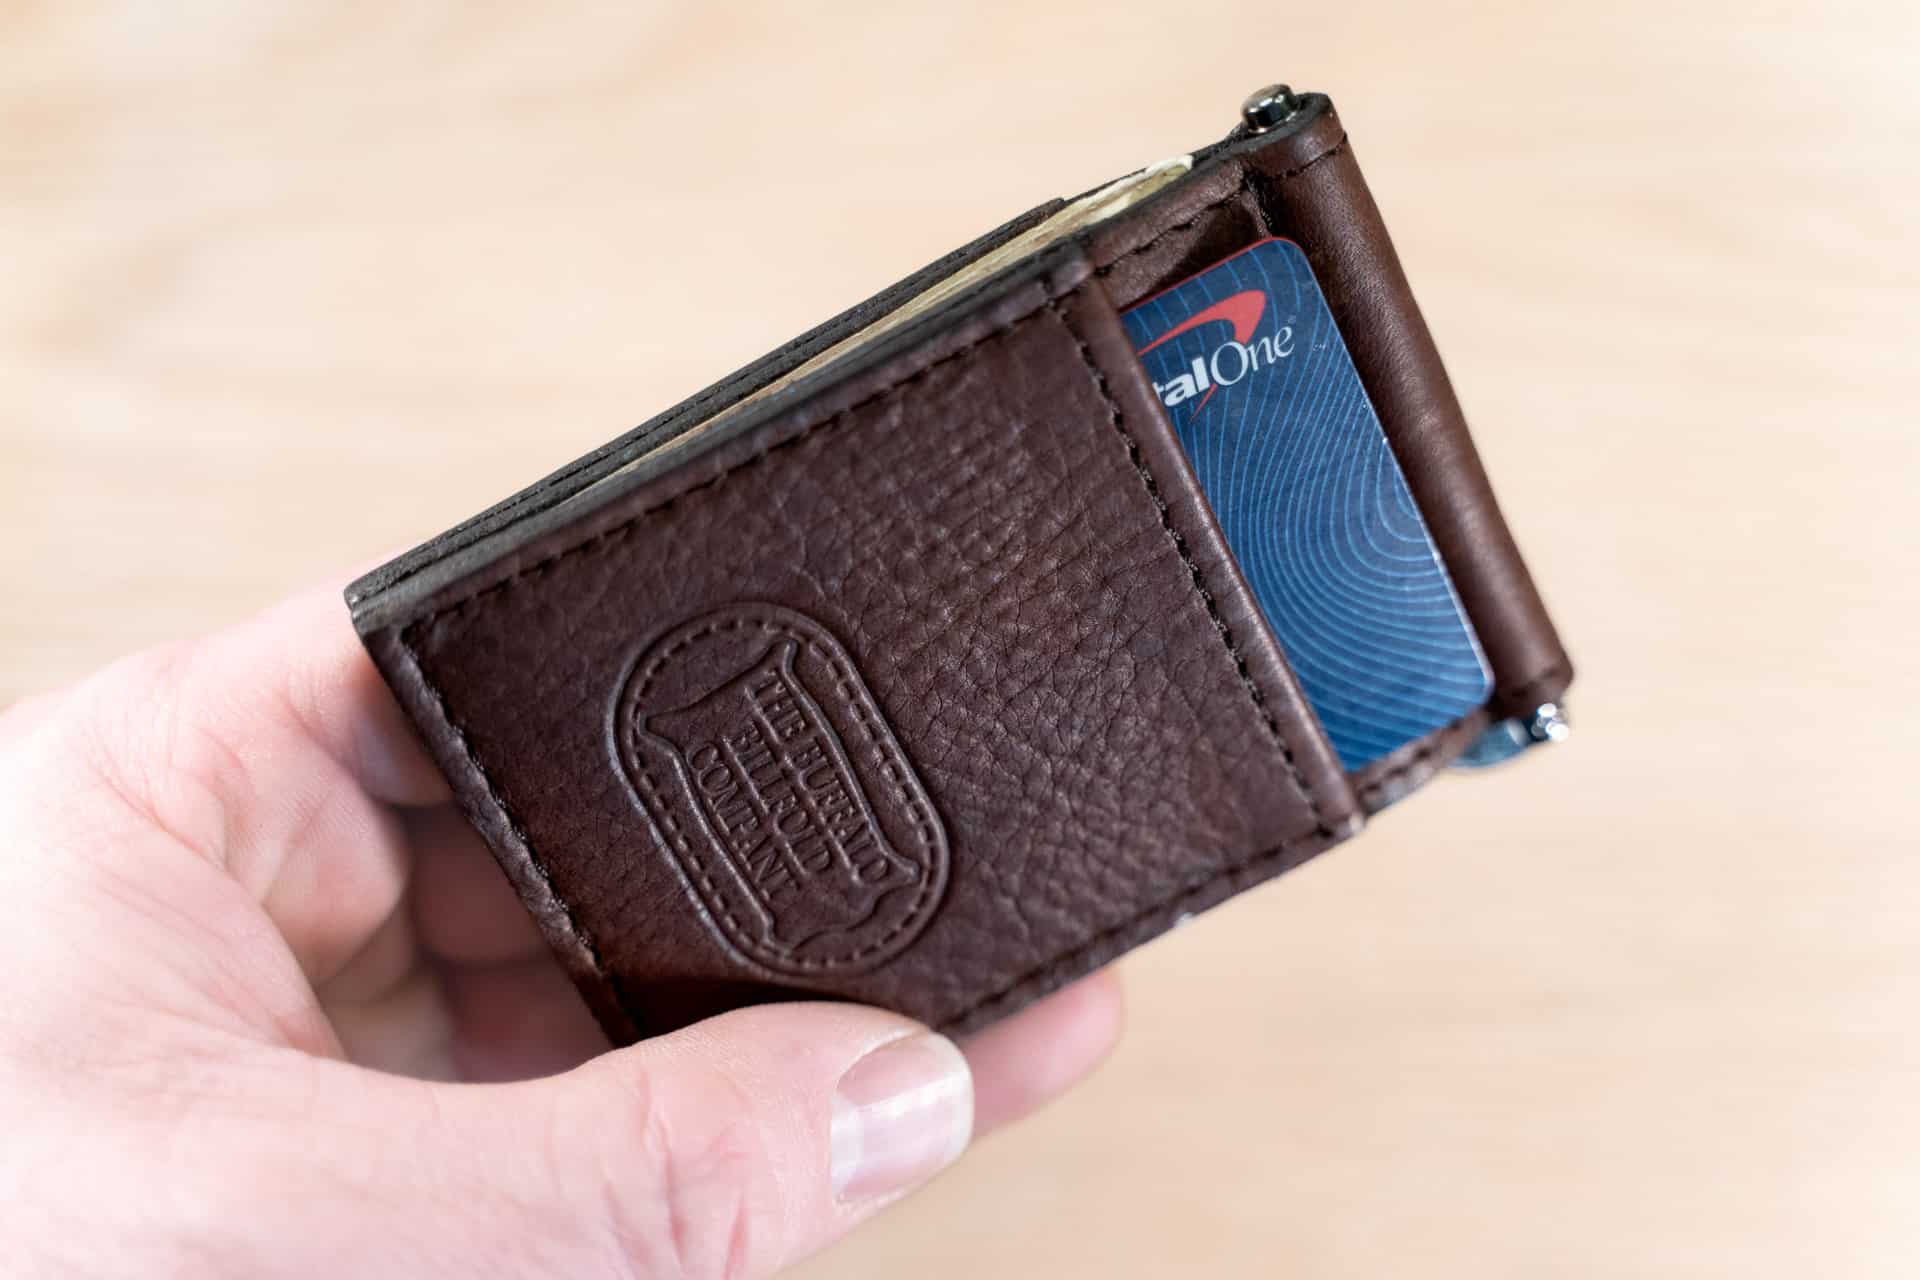 Credit card inserted in money clip card holder